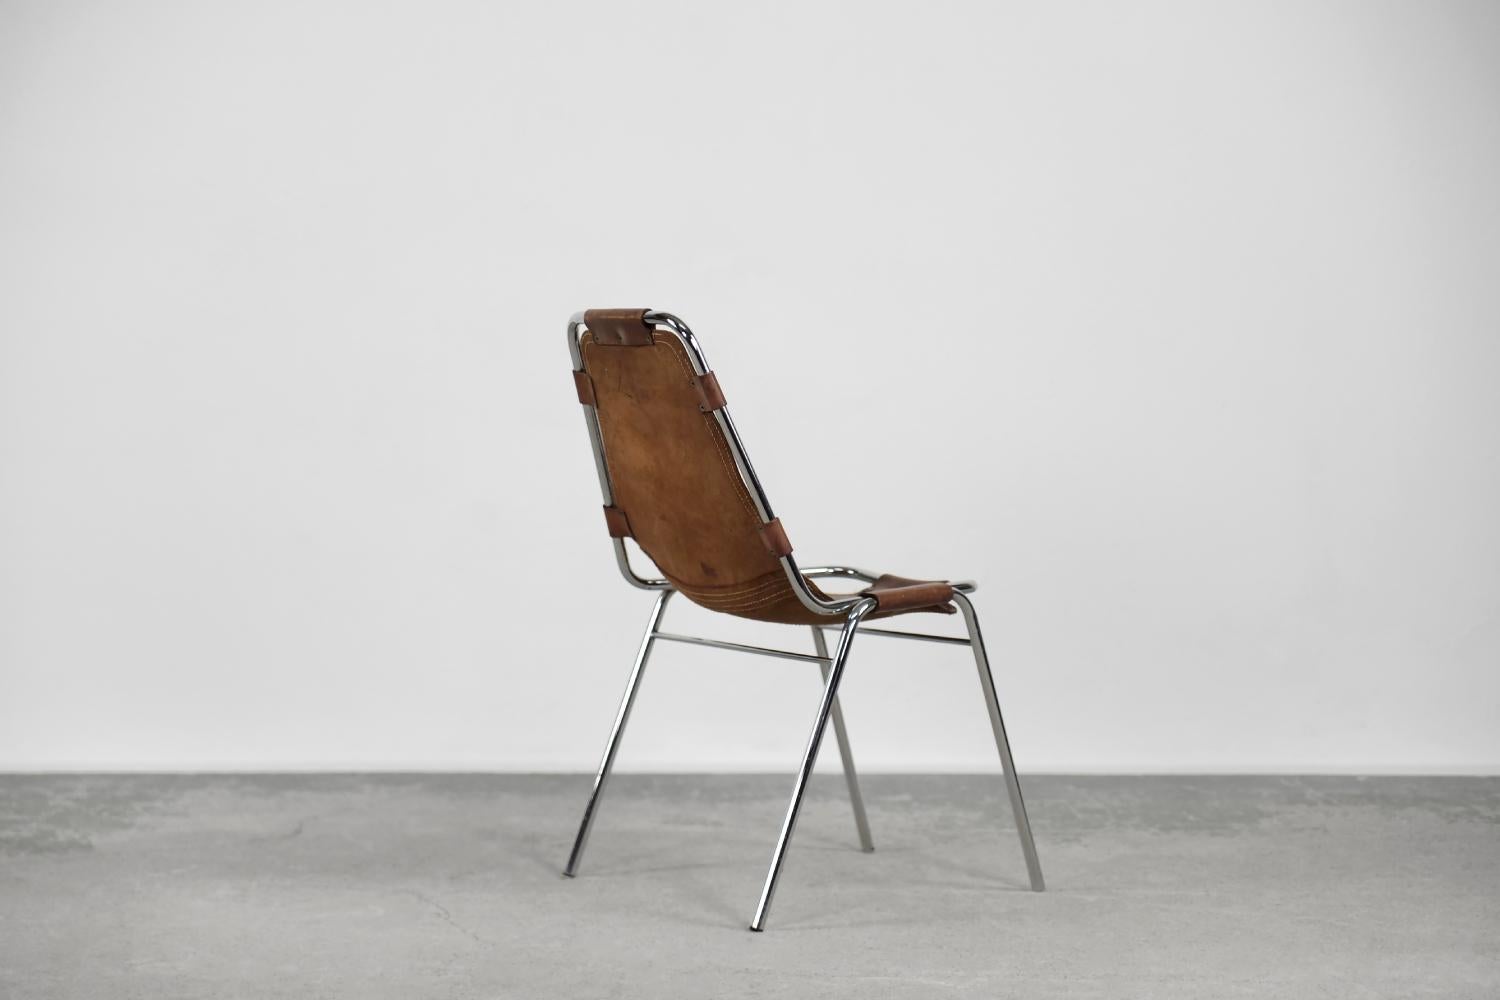 This Les Arcs chair was designed and manufactured by Dal Vera, and chosen by Charlotte Perriand for the alpine resort of Les Arcs in the Tarentaise Valley during the 1960s. The frame is made of chrome metal. The seat with the backrest is made of